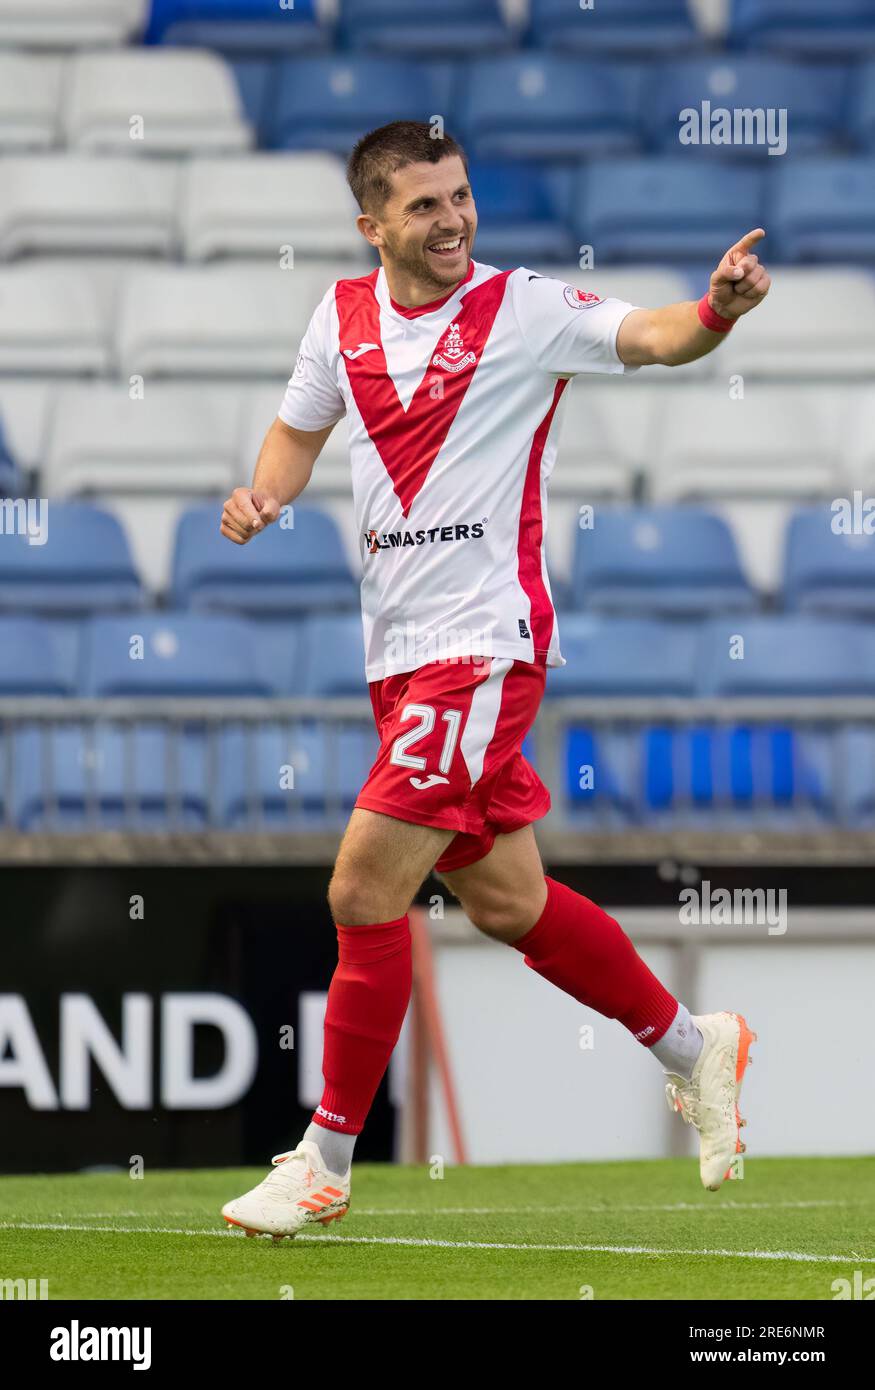 Caledonian Stadium, Inverness, UK. 25th July, 2023. This is from the Viaplay Cup tie between Inverness Caledonian Thistle FC (ICT) and Airdrieonians FC. PICTURE CONTENT:- Airdrie - Charles Telfer celebrates a Goal Credit: JASPERIMAGE/Alamy Live News Stock Photo